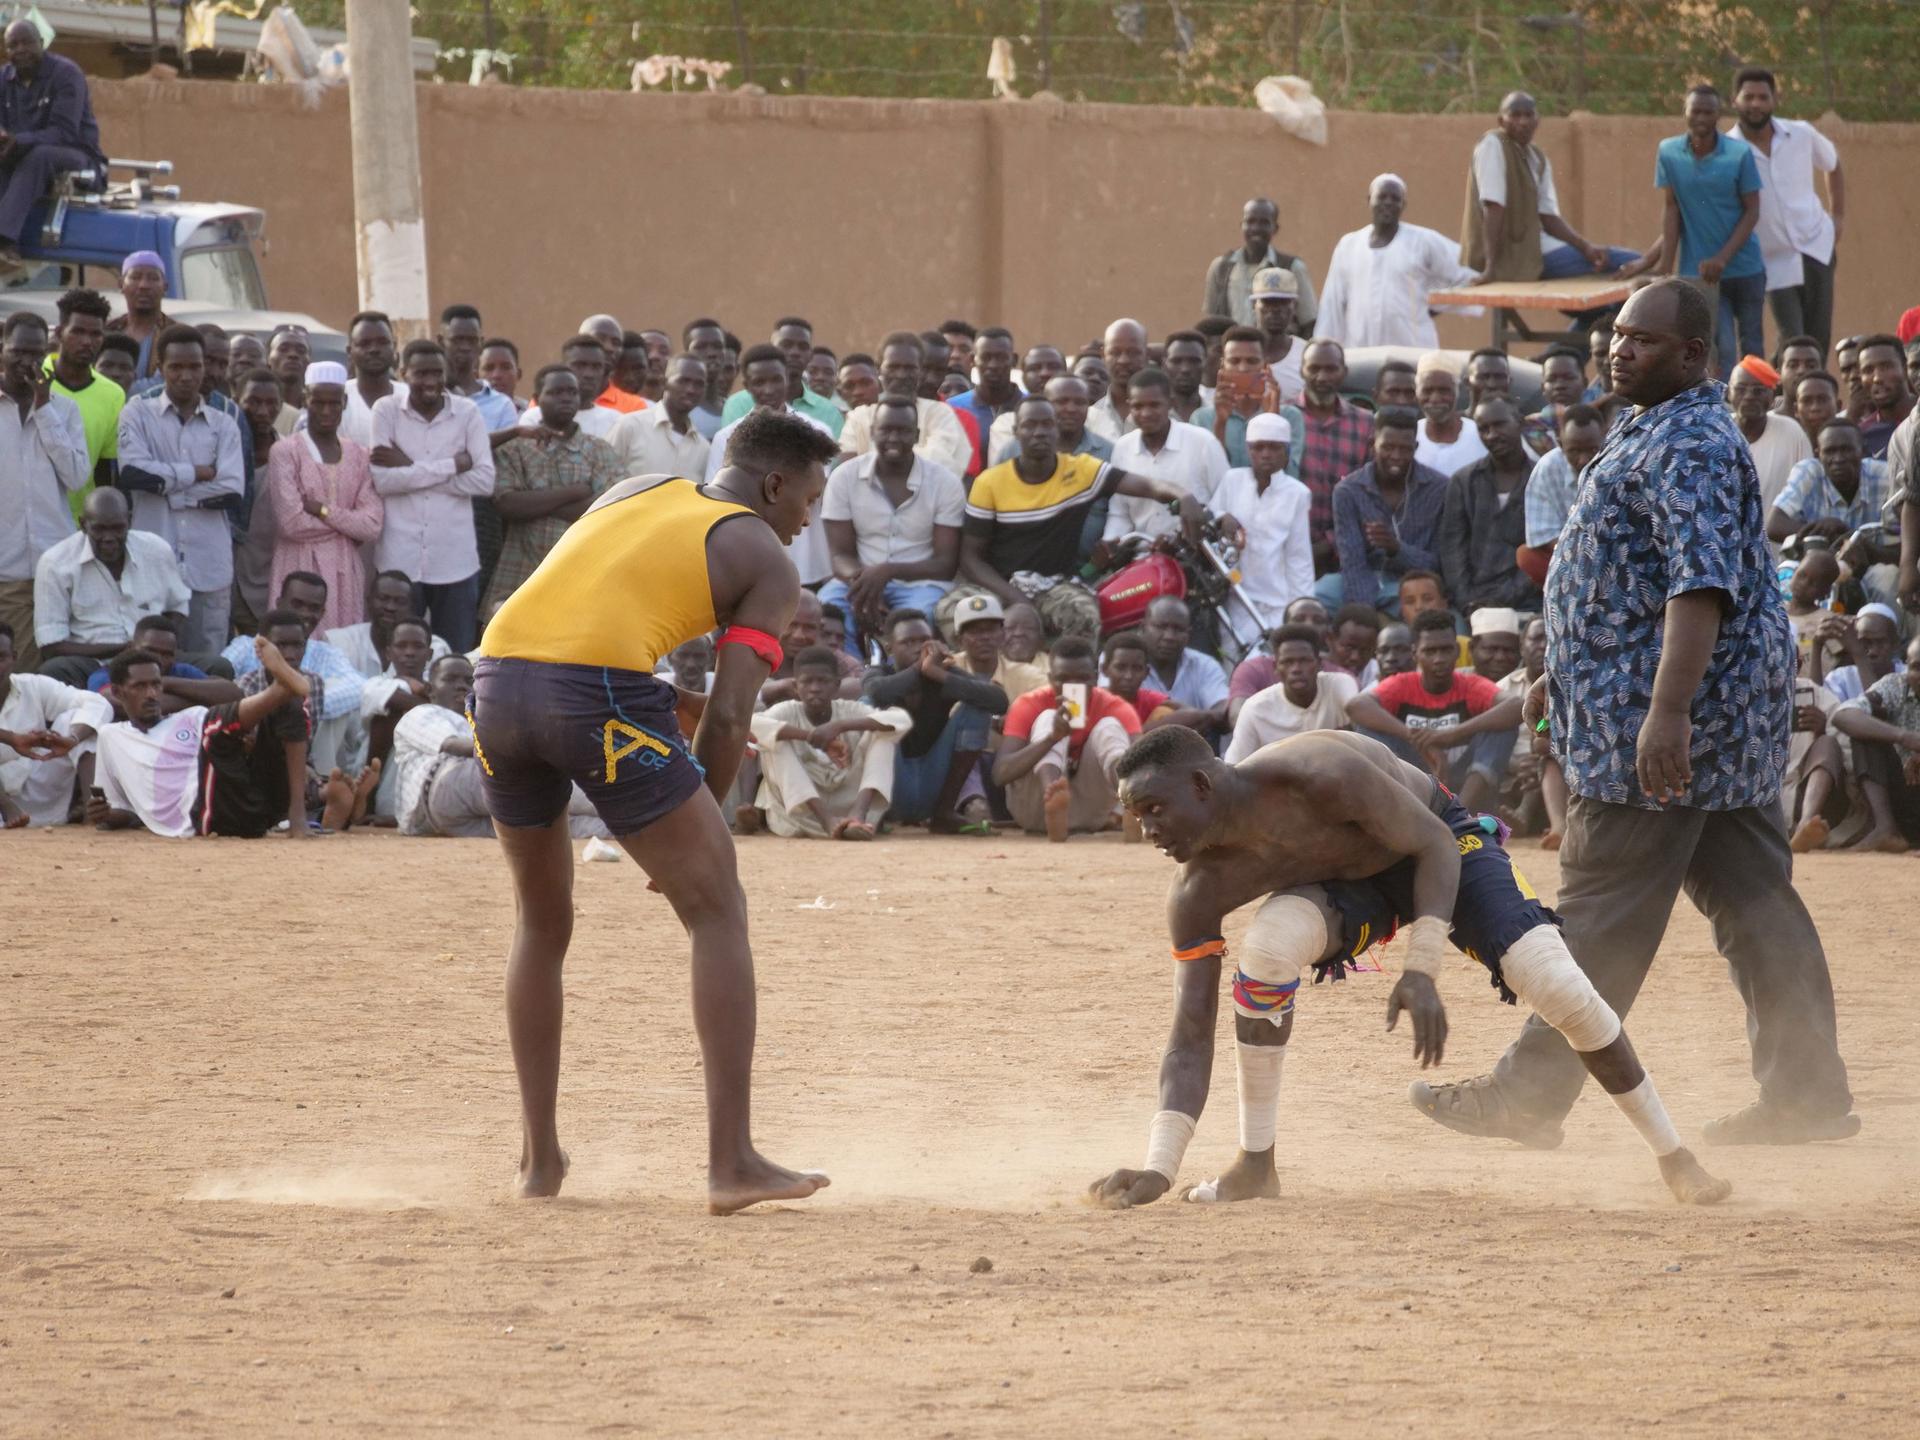 To men are shown wearing shorts and t-shirts while wrestling in a sandy courtyard.